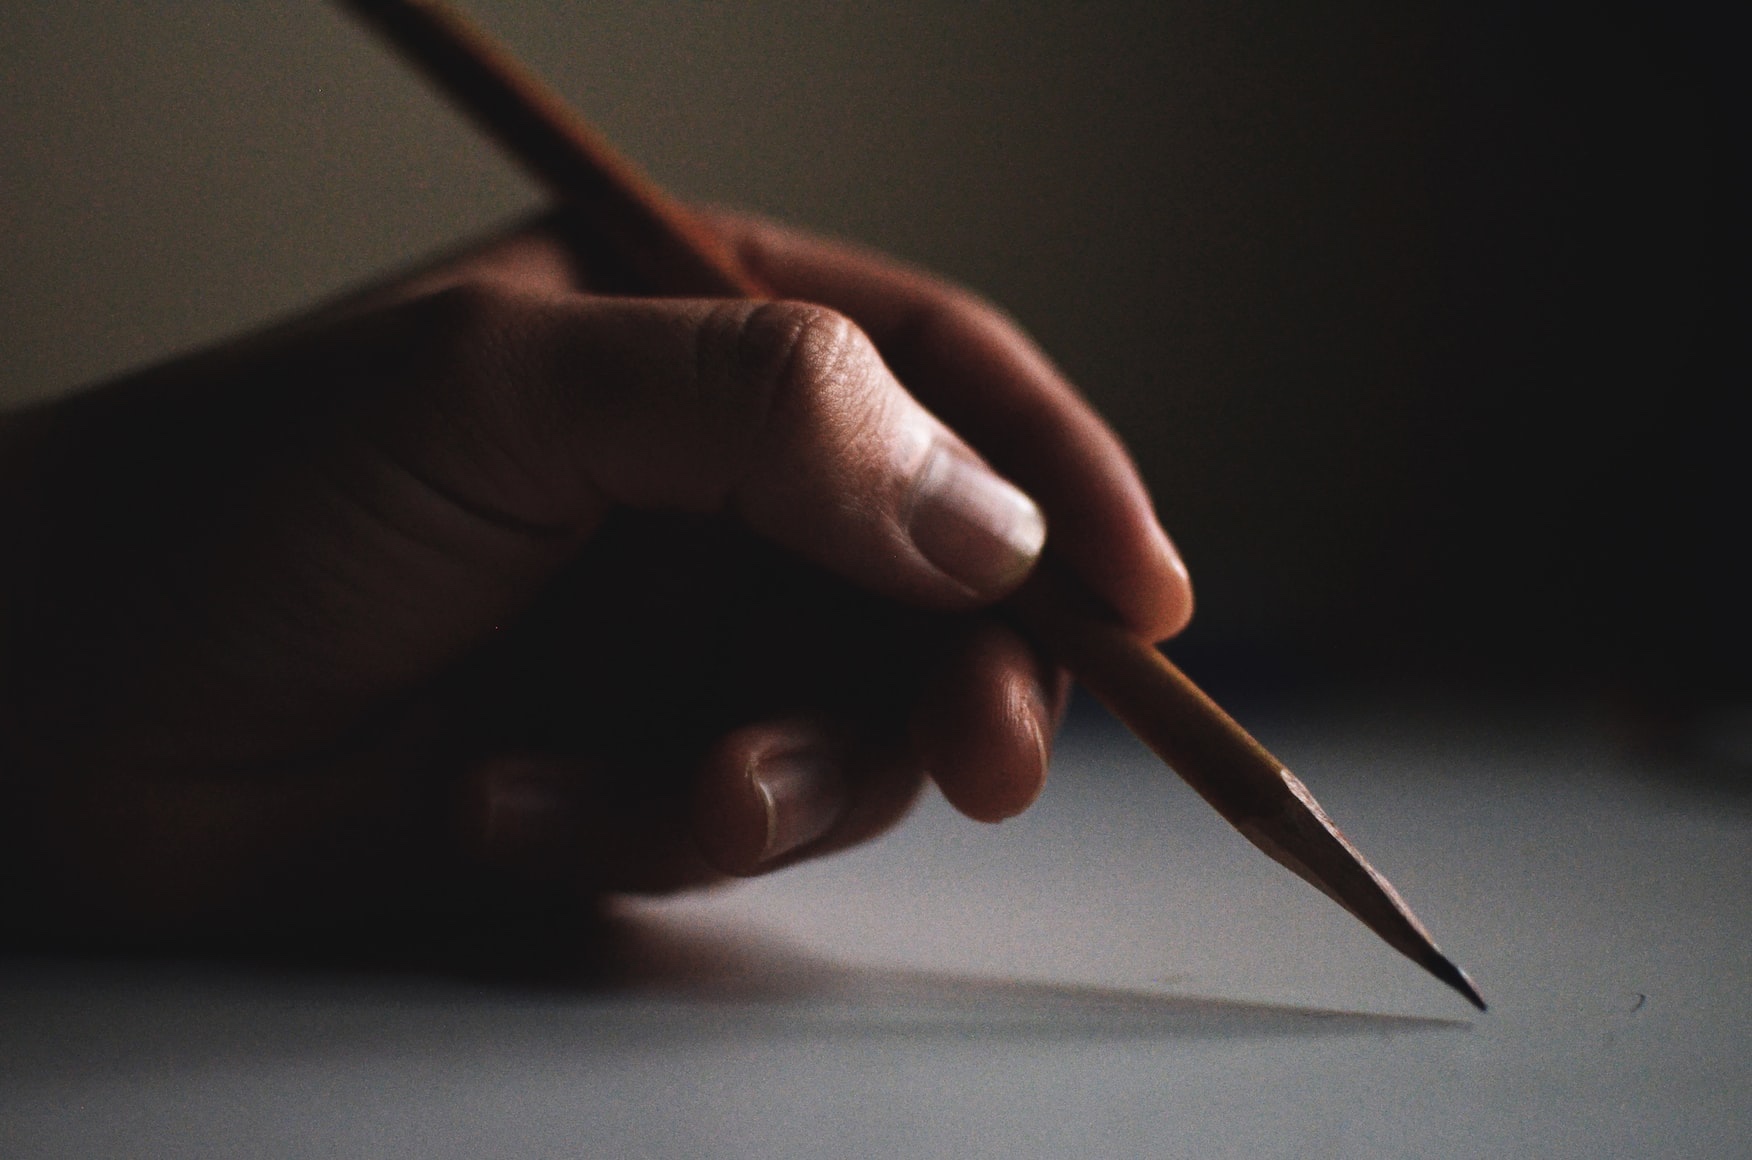 Hand holding a pencil poised for writing